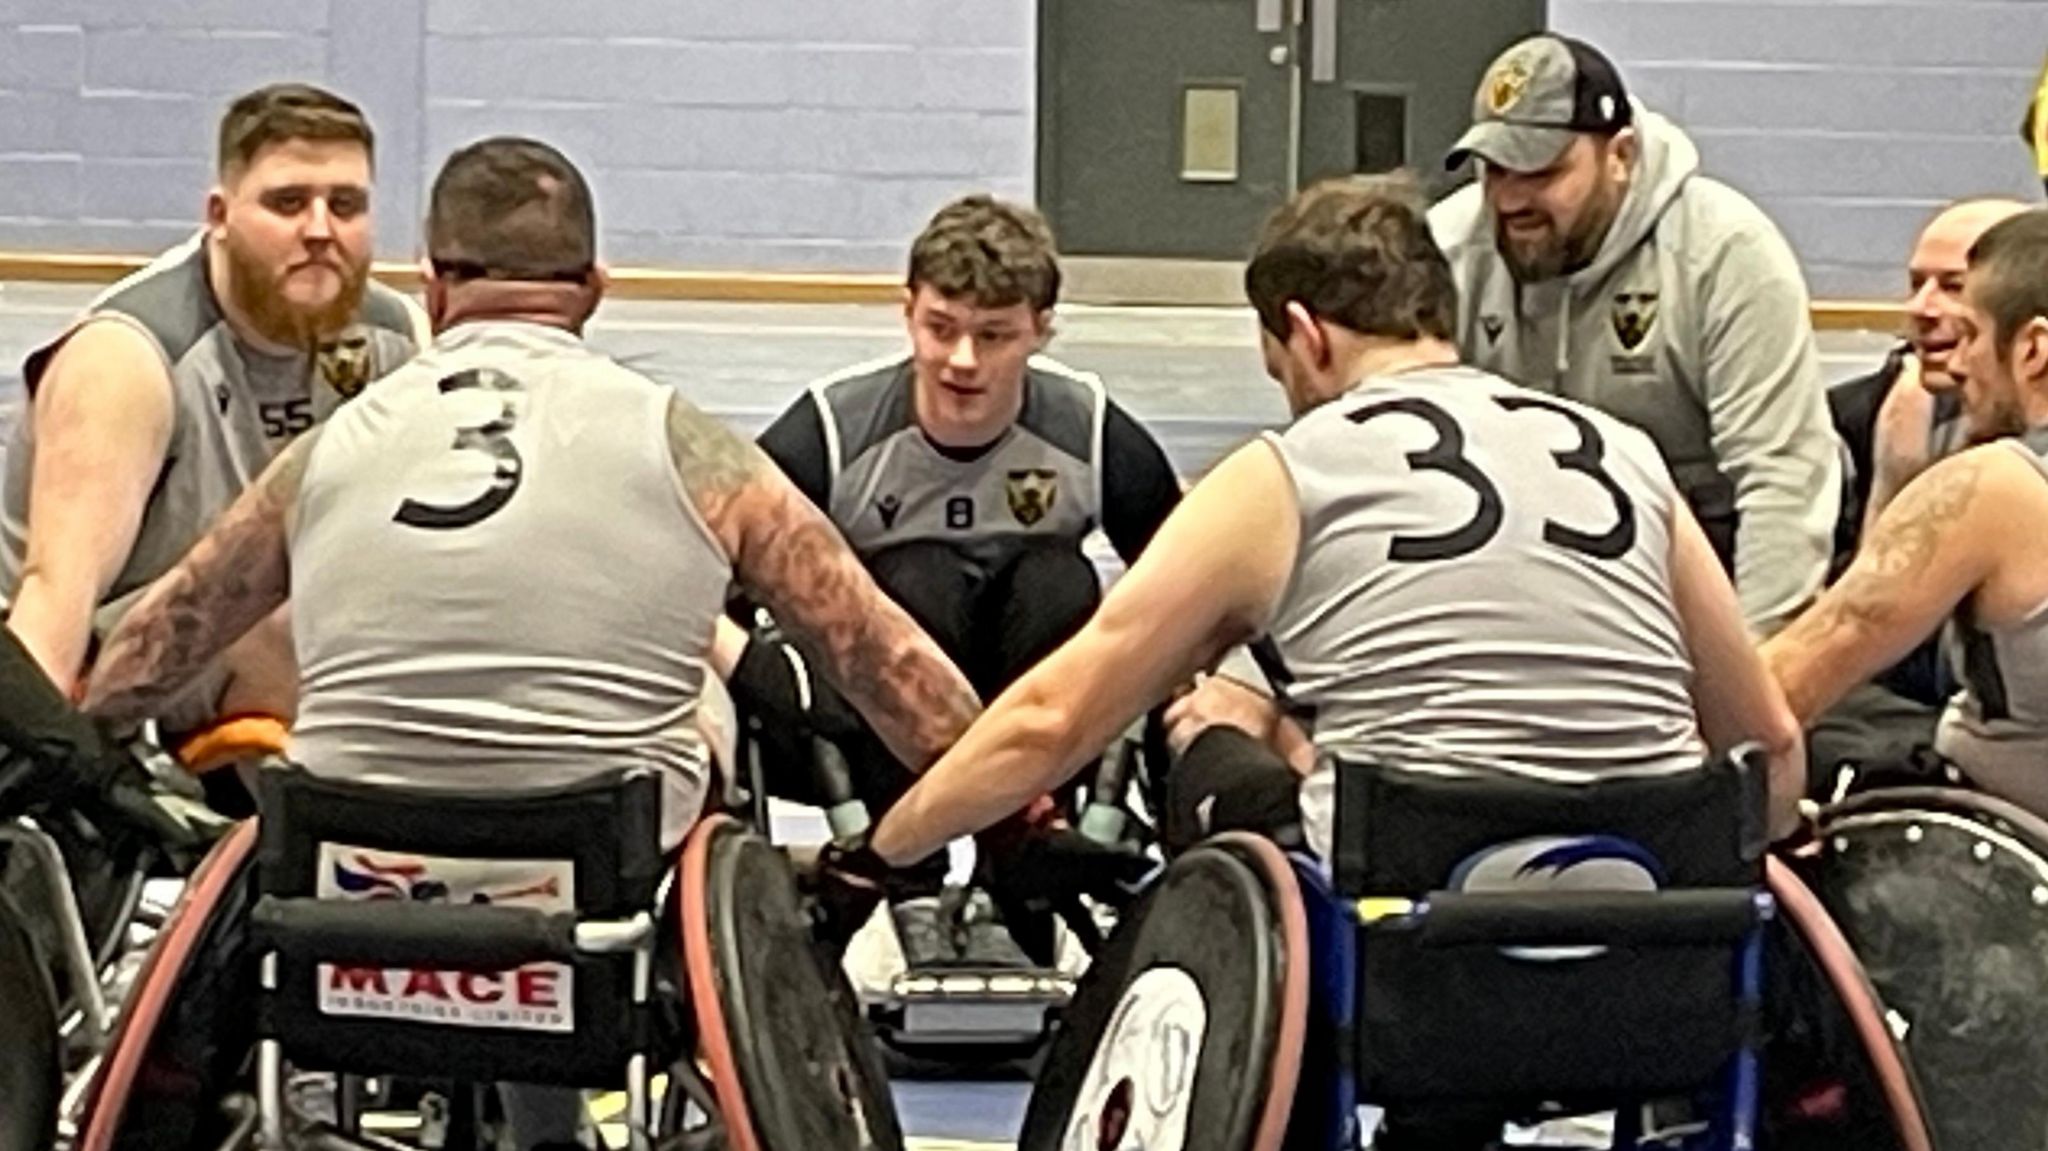 Tristan training in wheelchair rugby